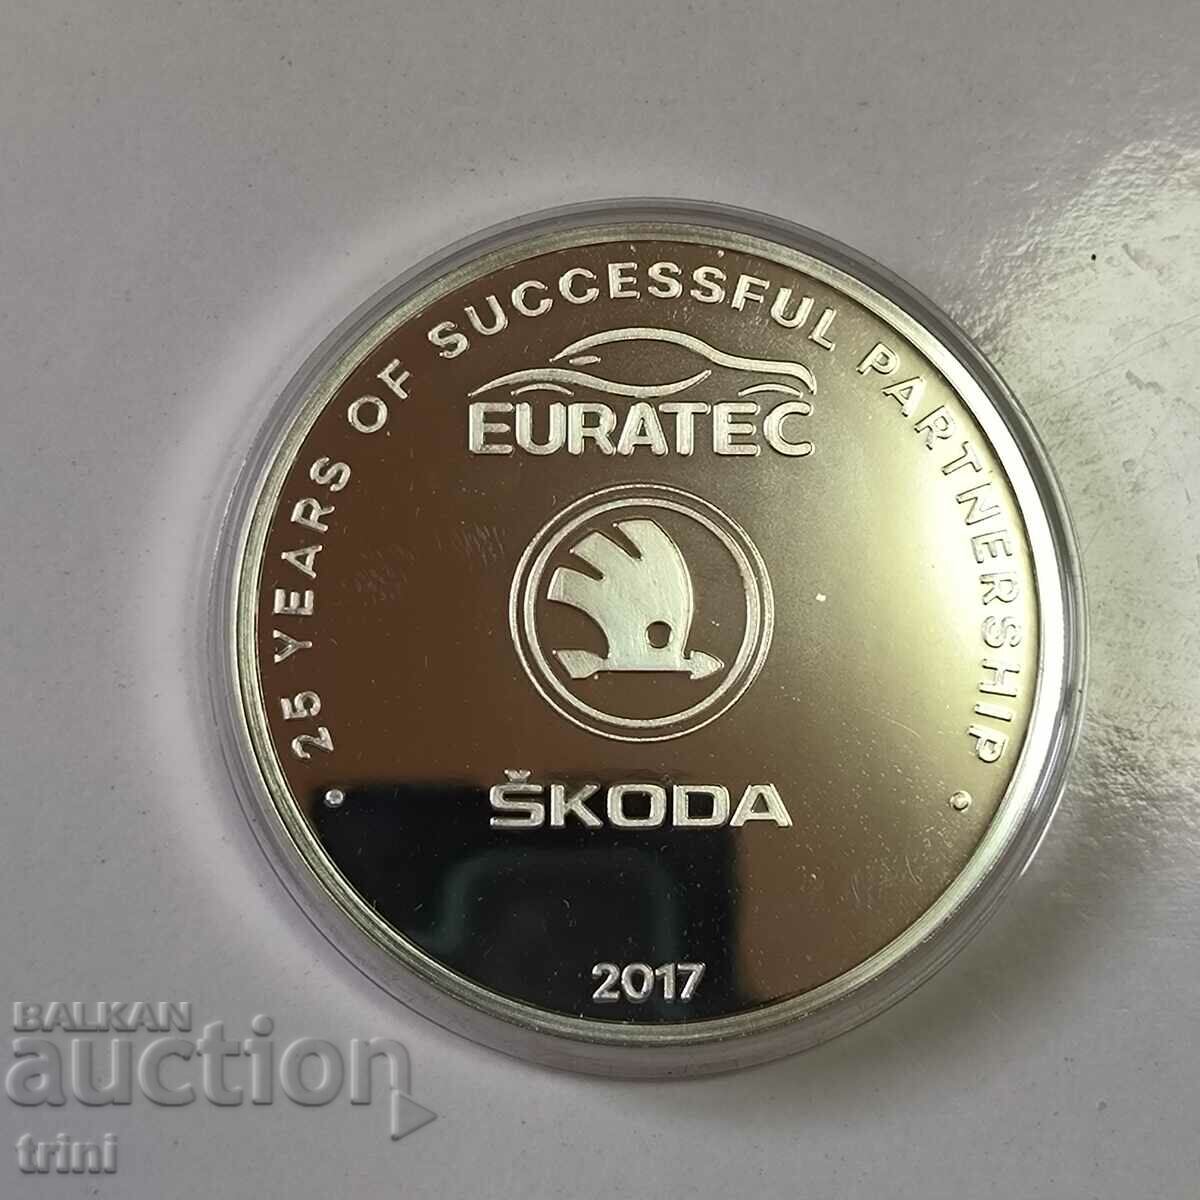 Silver-plated plaque 25 years. Euratek - ŠKODA limited series